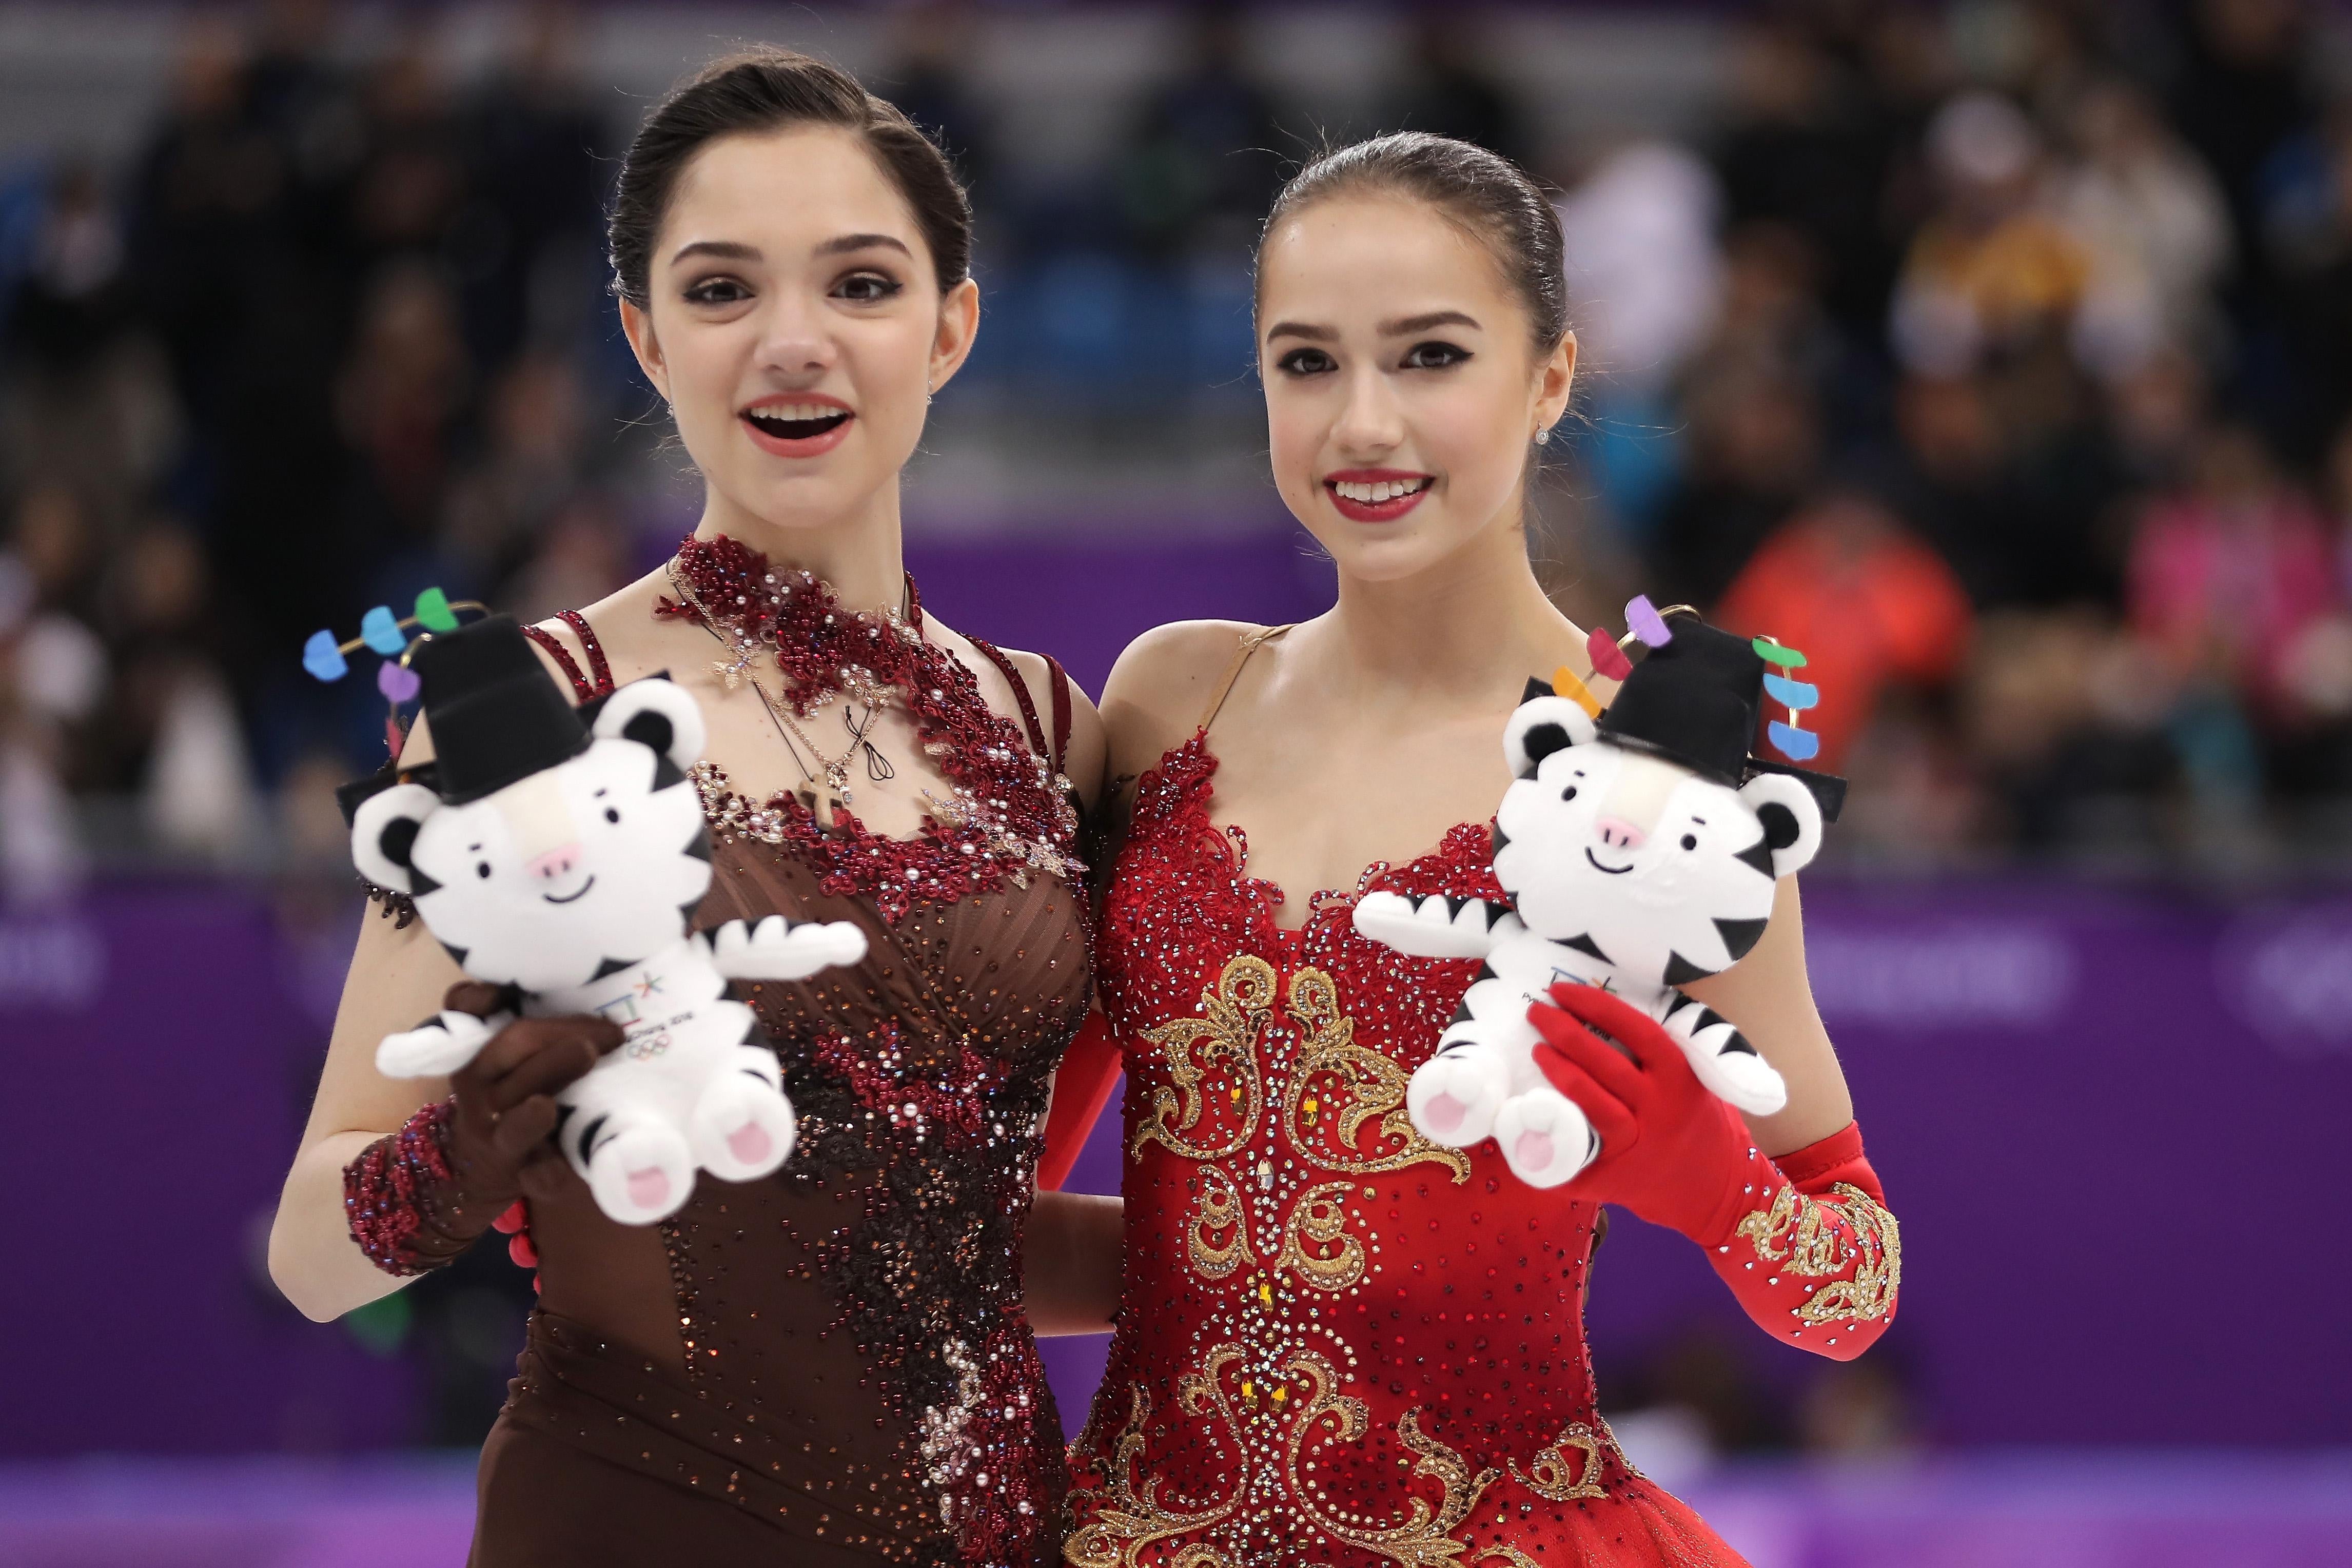 GANGNEUNG, SOUTH KOREA - FEBRUARY 23:  Silver medal winner Evgenia Medvedeva of Olympic Athlete from Russia (L) and gold medal winner Alina Zagitova of Olympic Athlete from Russia celebrate during the victory ceremony for the Ladies Single Skating Free Skating on day fourteen of the PyeongChang 2018 Winter Olympic Games at Gangneung Ice Arena on February 23, 2018 in Gangneung, South Korea.  (Photo by Richard Heathcote/Getty Images)